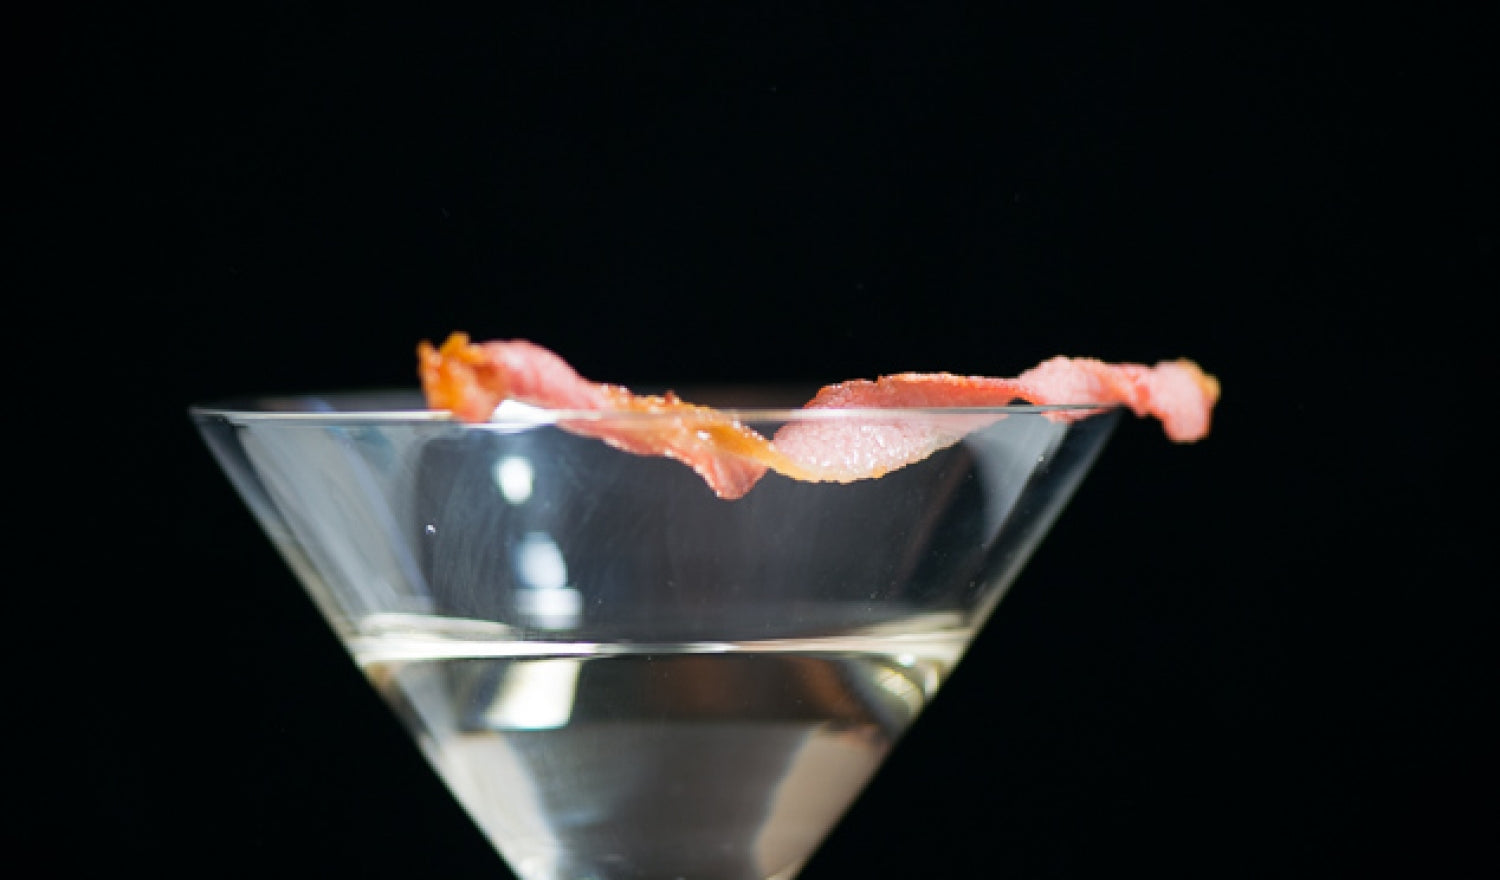 Bacon Cocktail - The Smoked Gin Martini Recipe